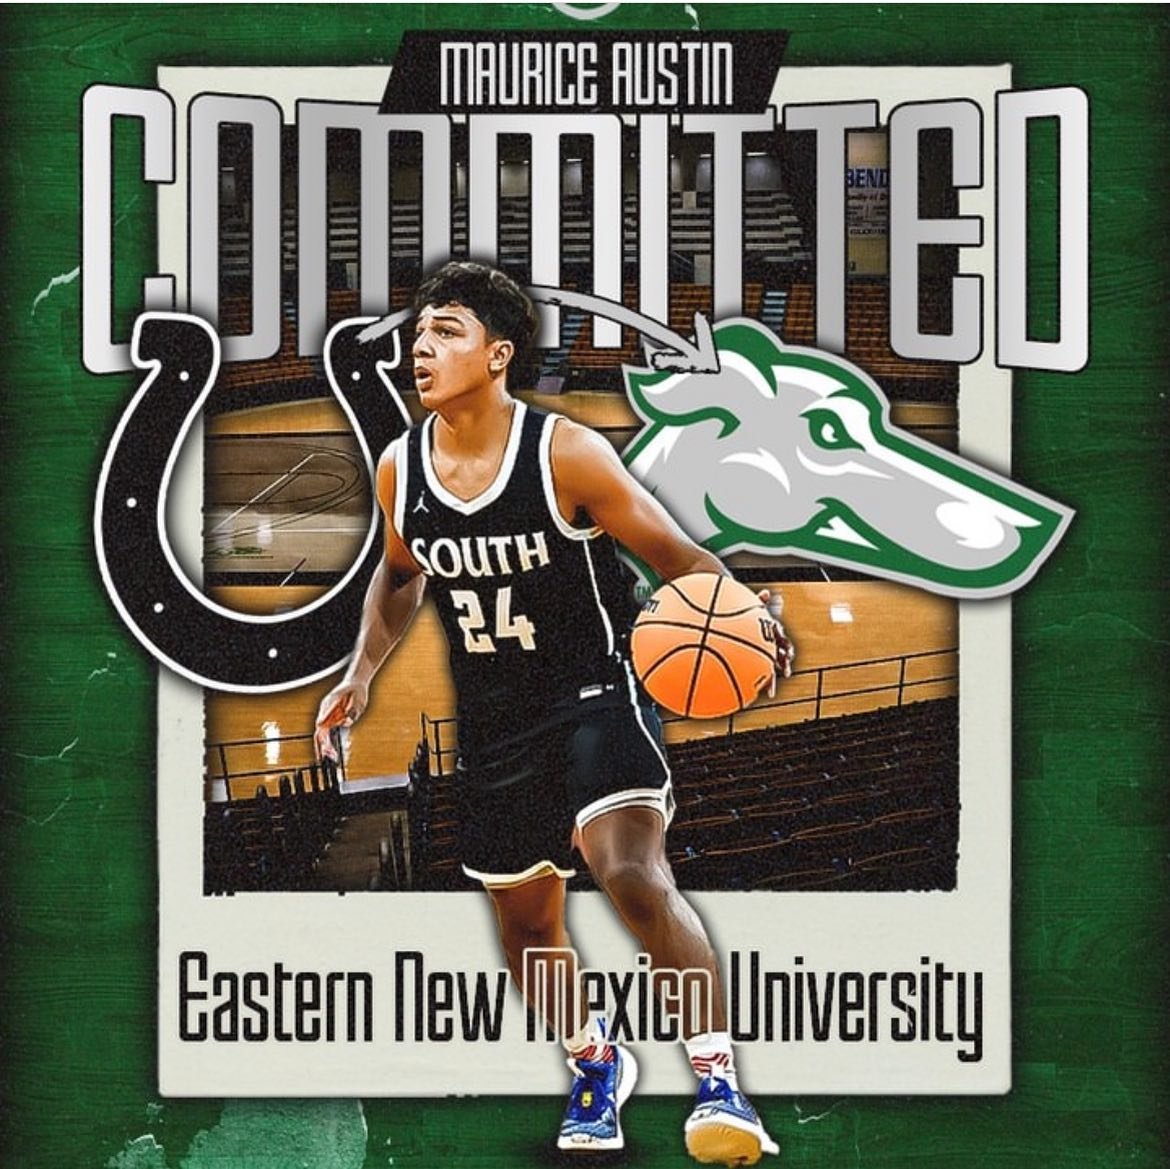 Congratulations to Maurice Austin on his commitment to Eastern New Mexico U! If you know Mo and his work ethic, you know this is just the beginning for him! Excited to follow his college career!